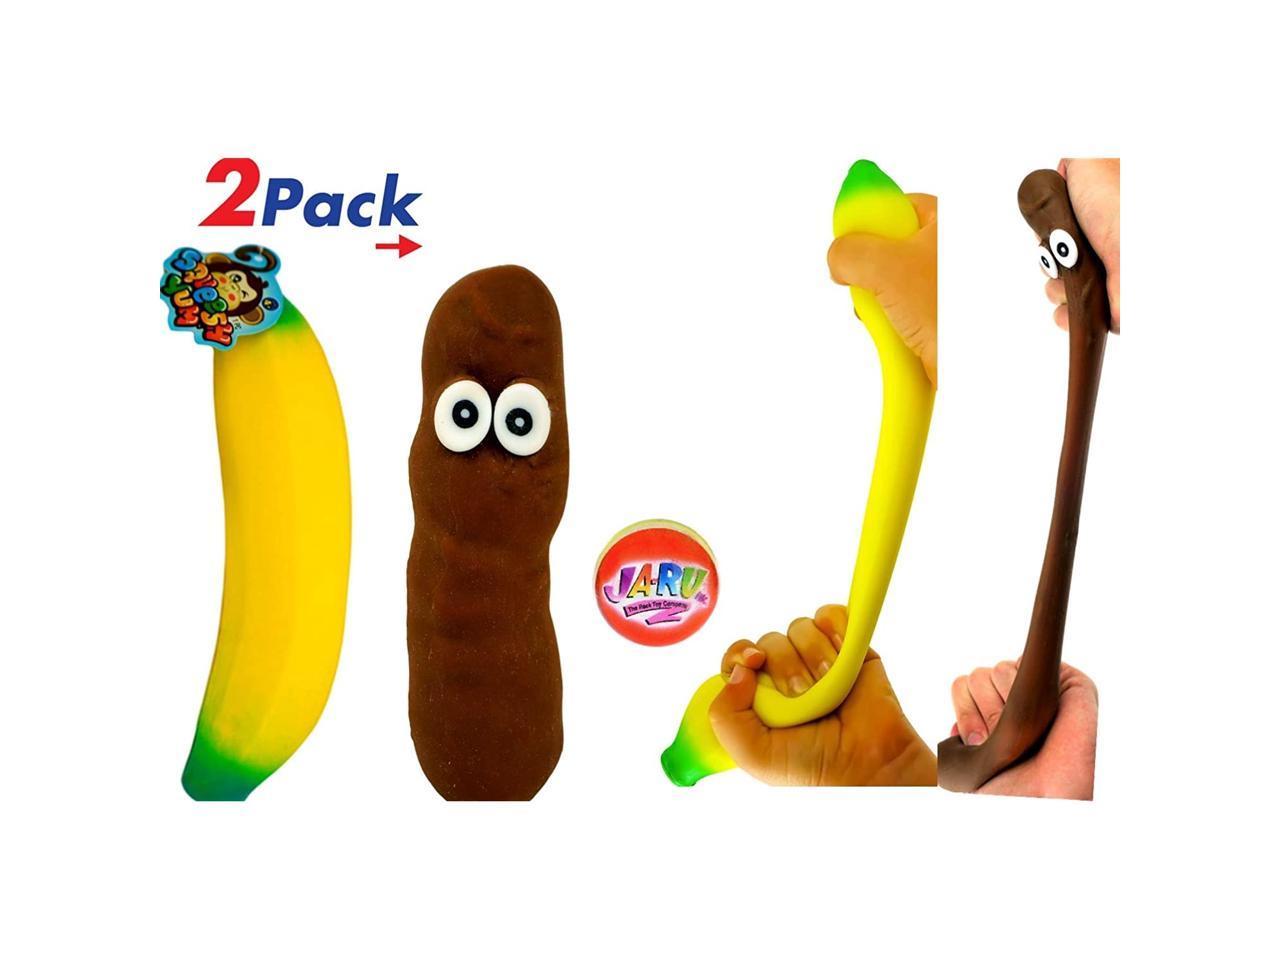 and 1 Collectable Pack of 2 JA-RU Super Stretchy Banana Squish Yum Buh Nay Nay 